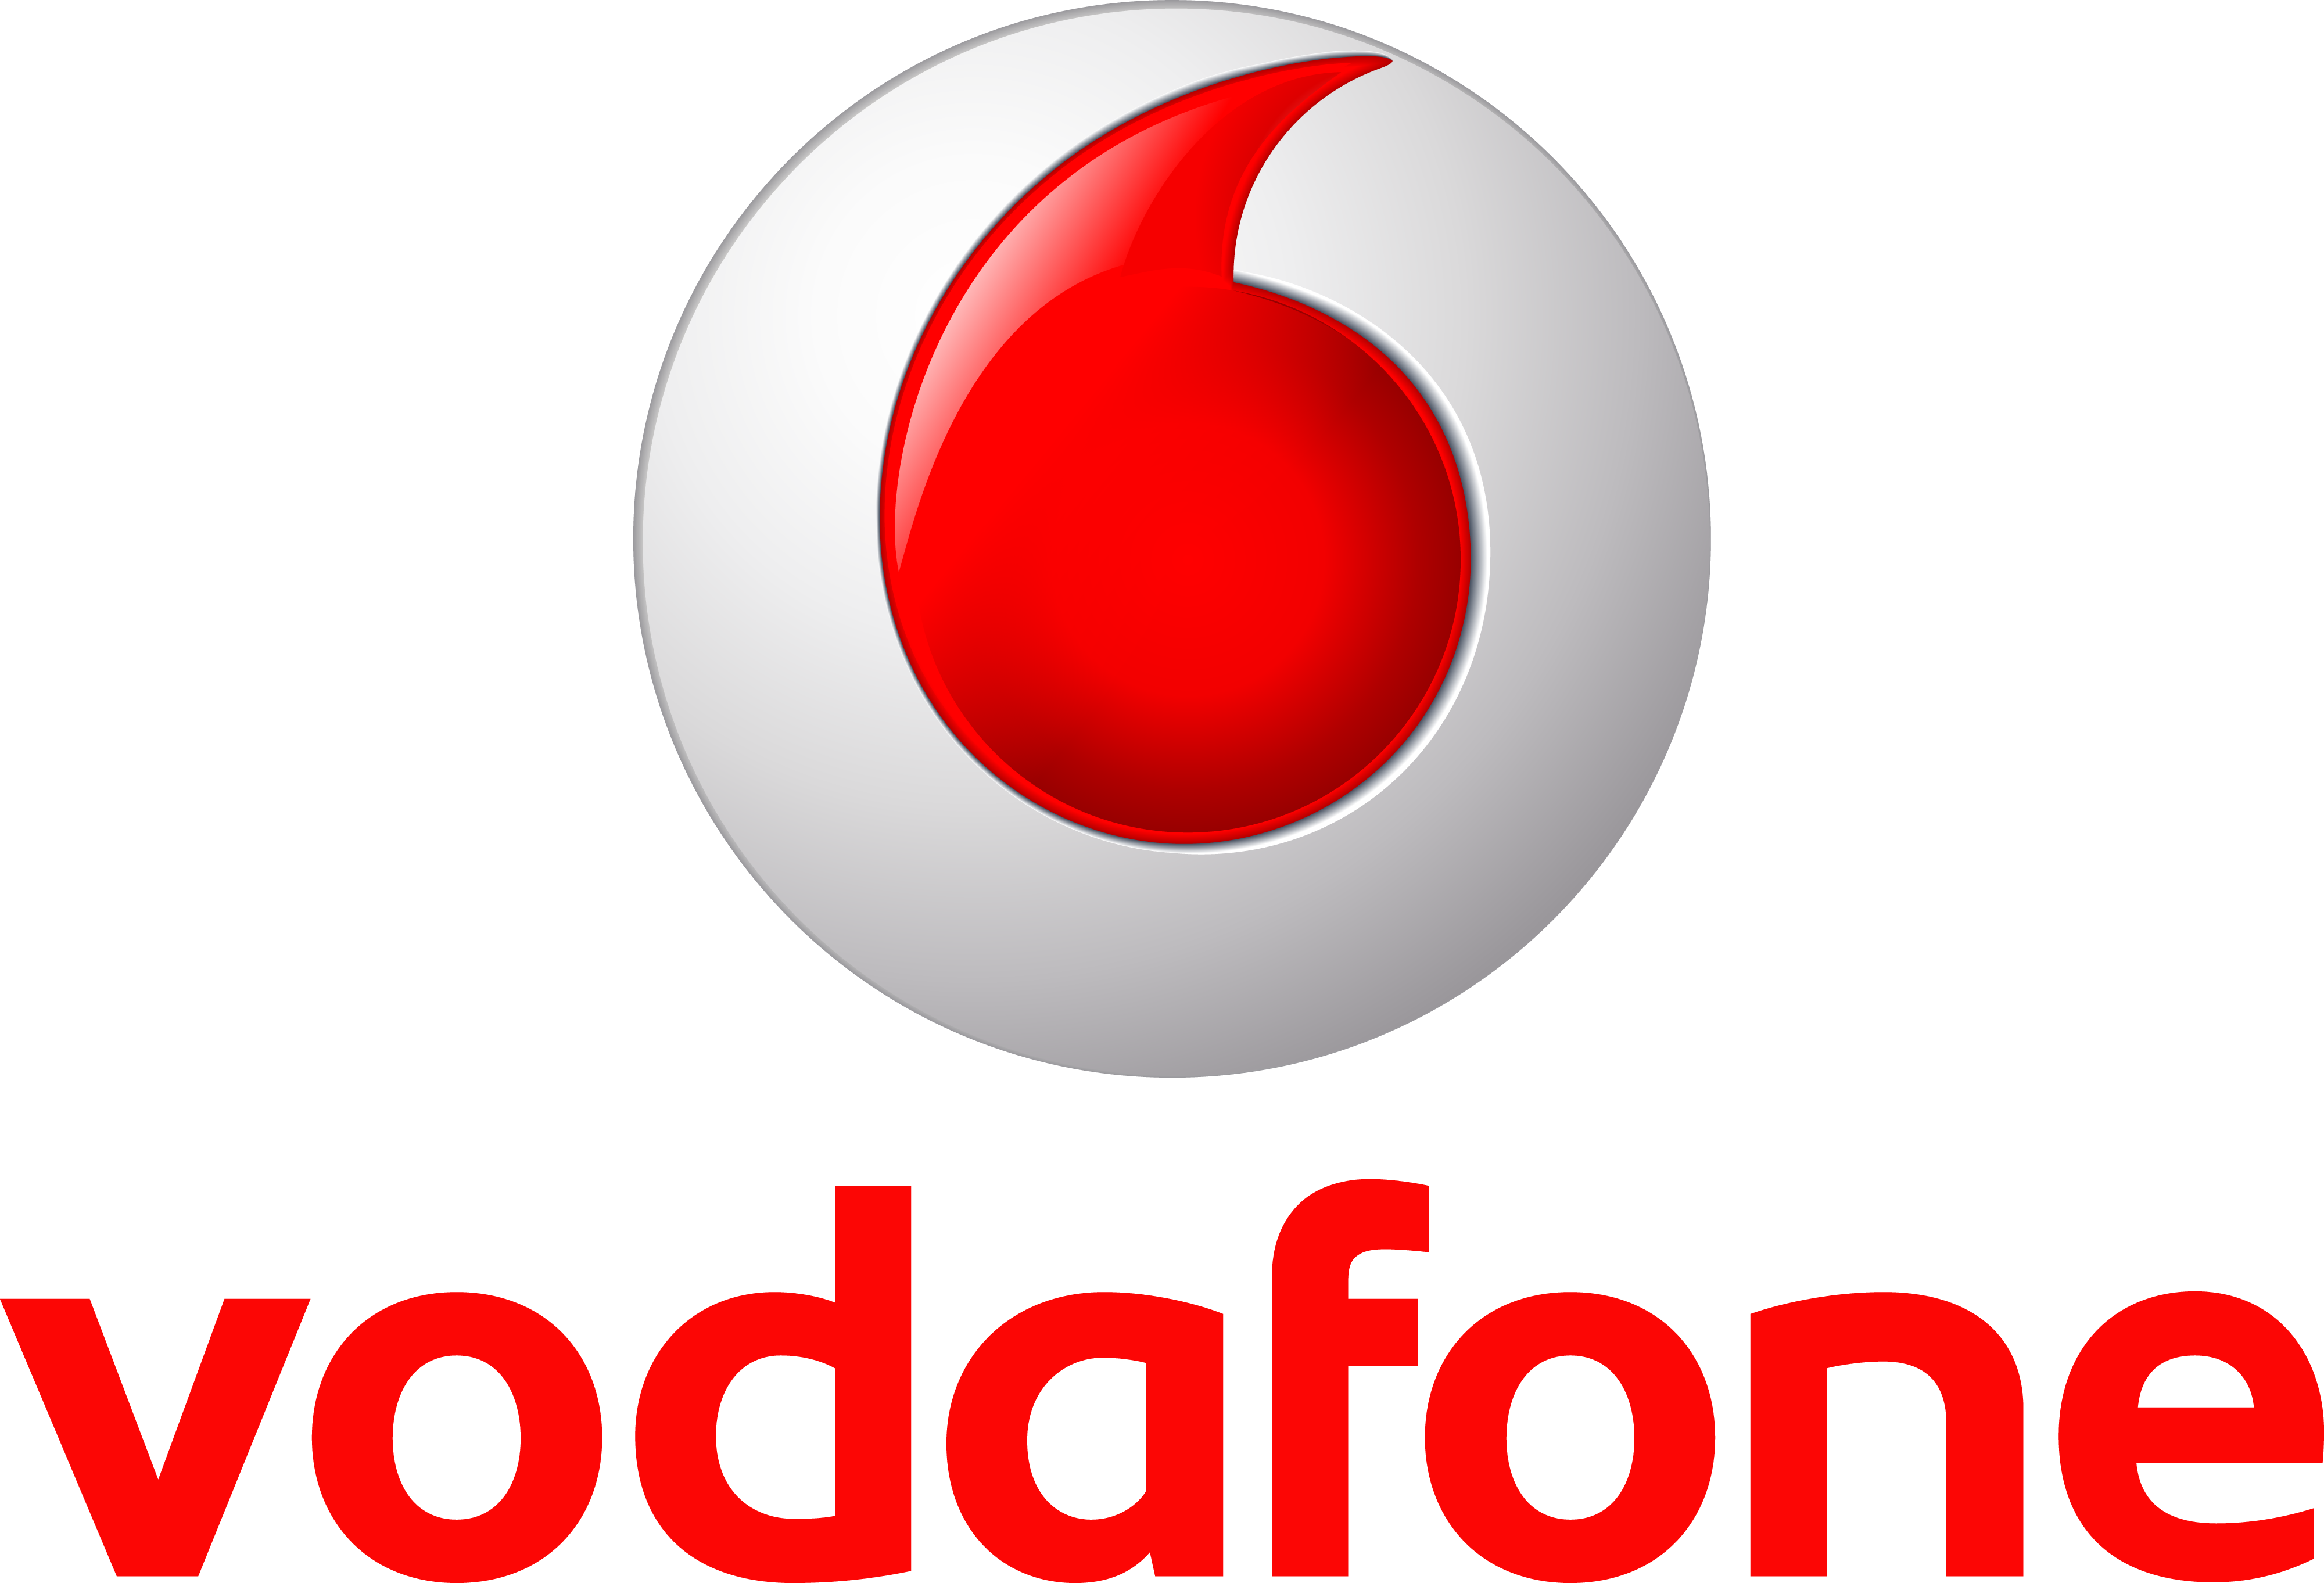 Vodafone Coupons & Promo Codes